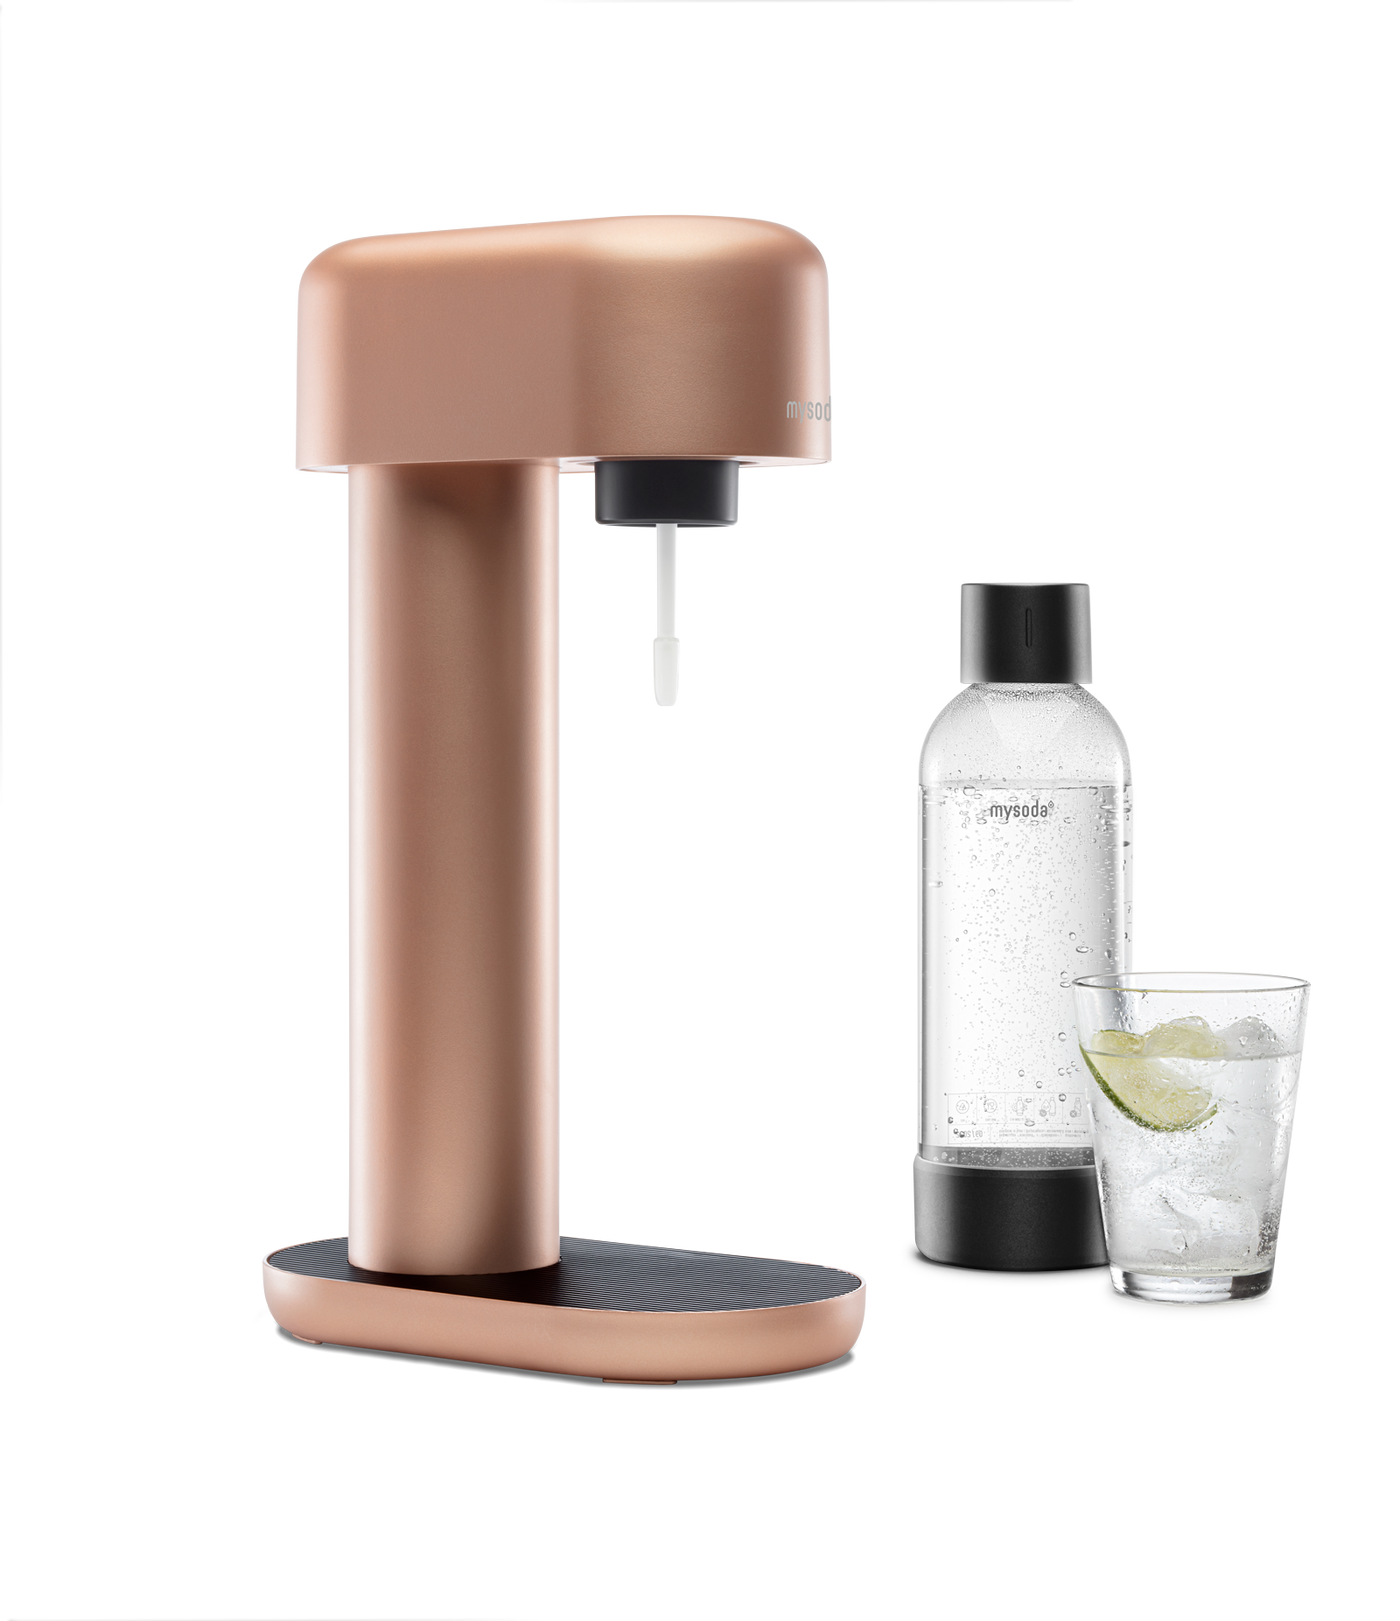 A copper Ruby sparkling water maker with bottle